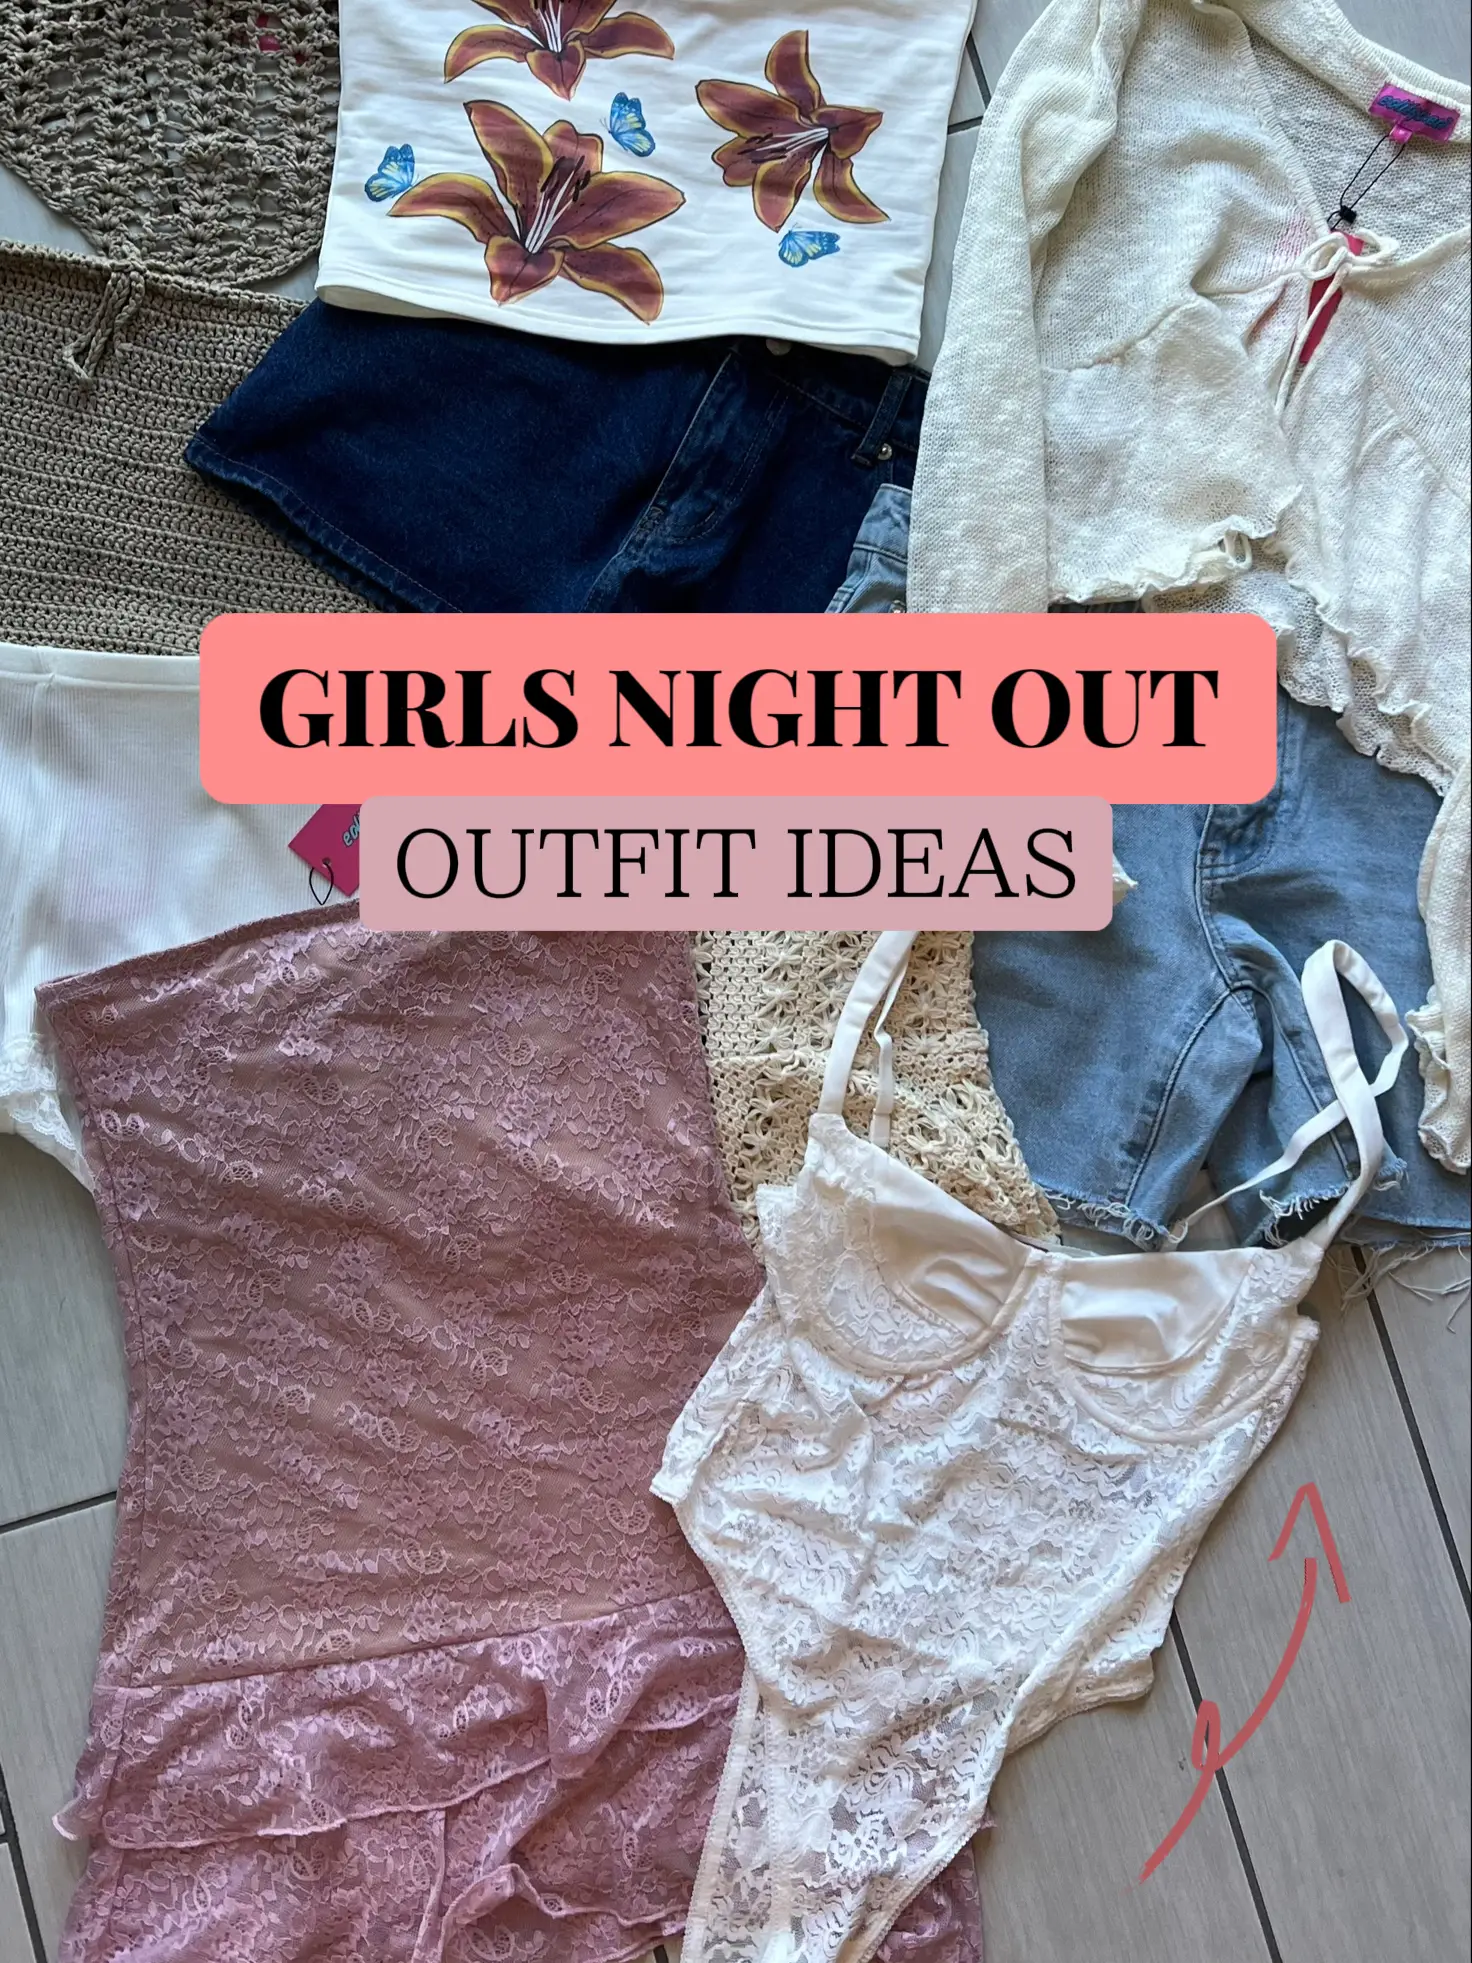 Girls Night Outfit Ideas 💗✨, Gallery posted by Bri Ruff